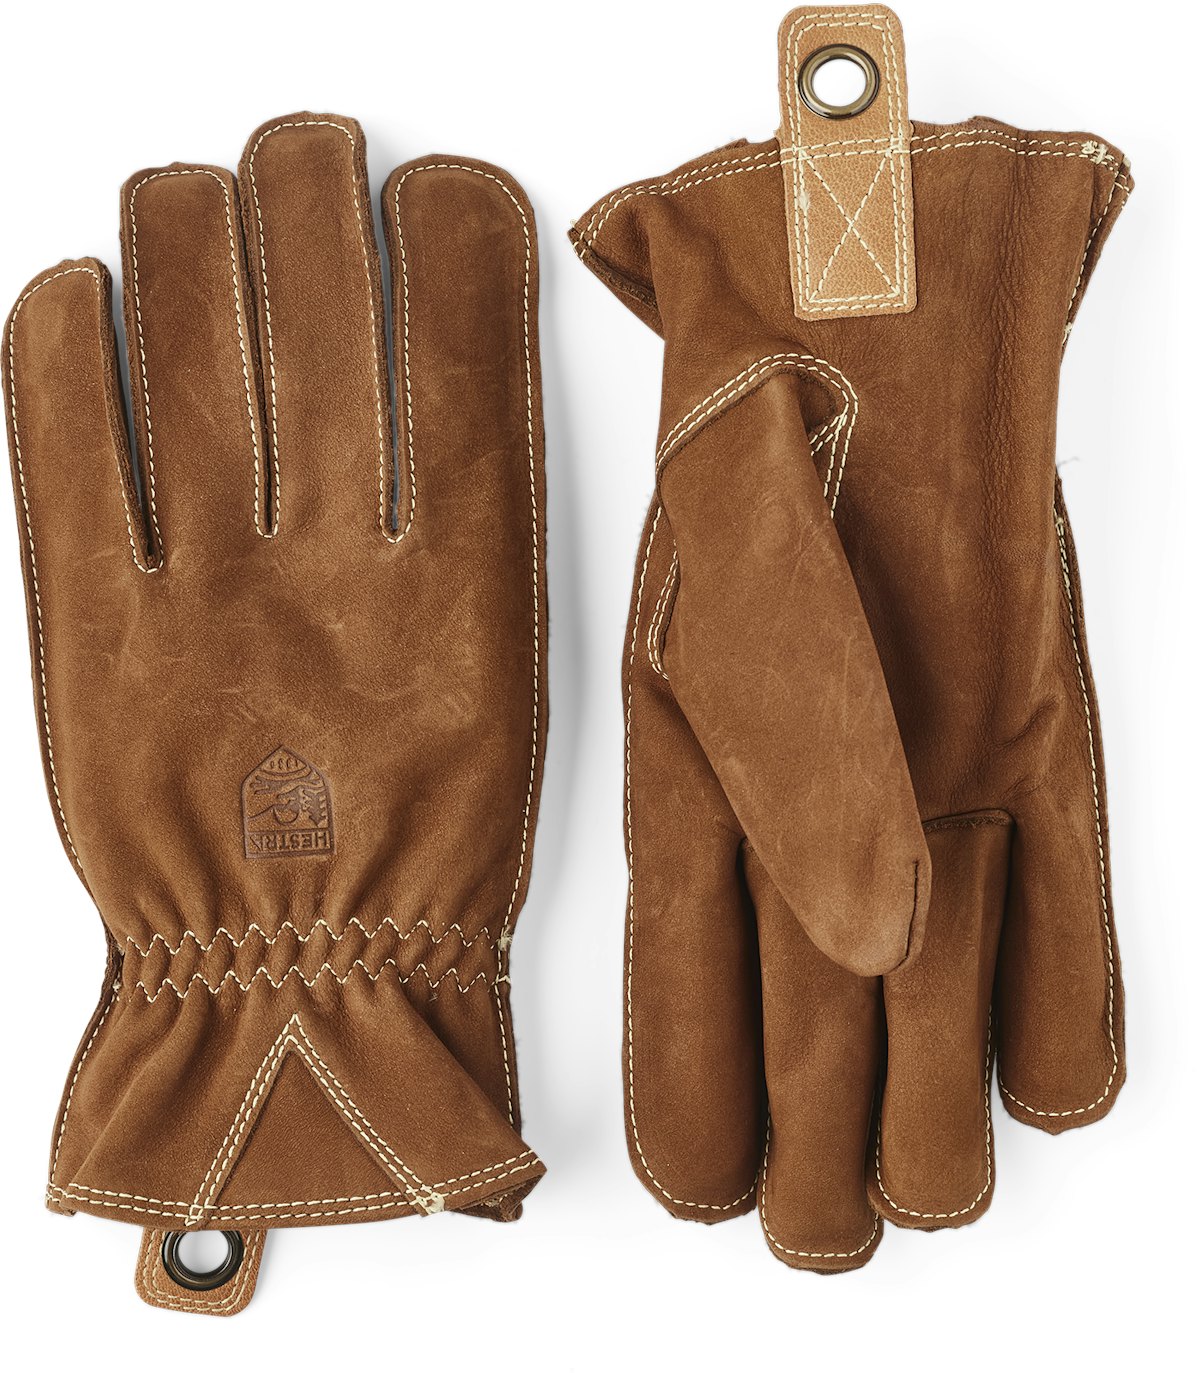 Size XL Leather Work Gloves